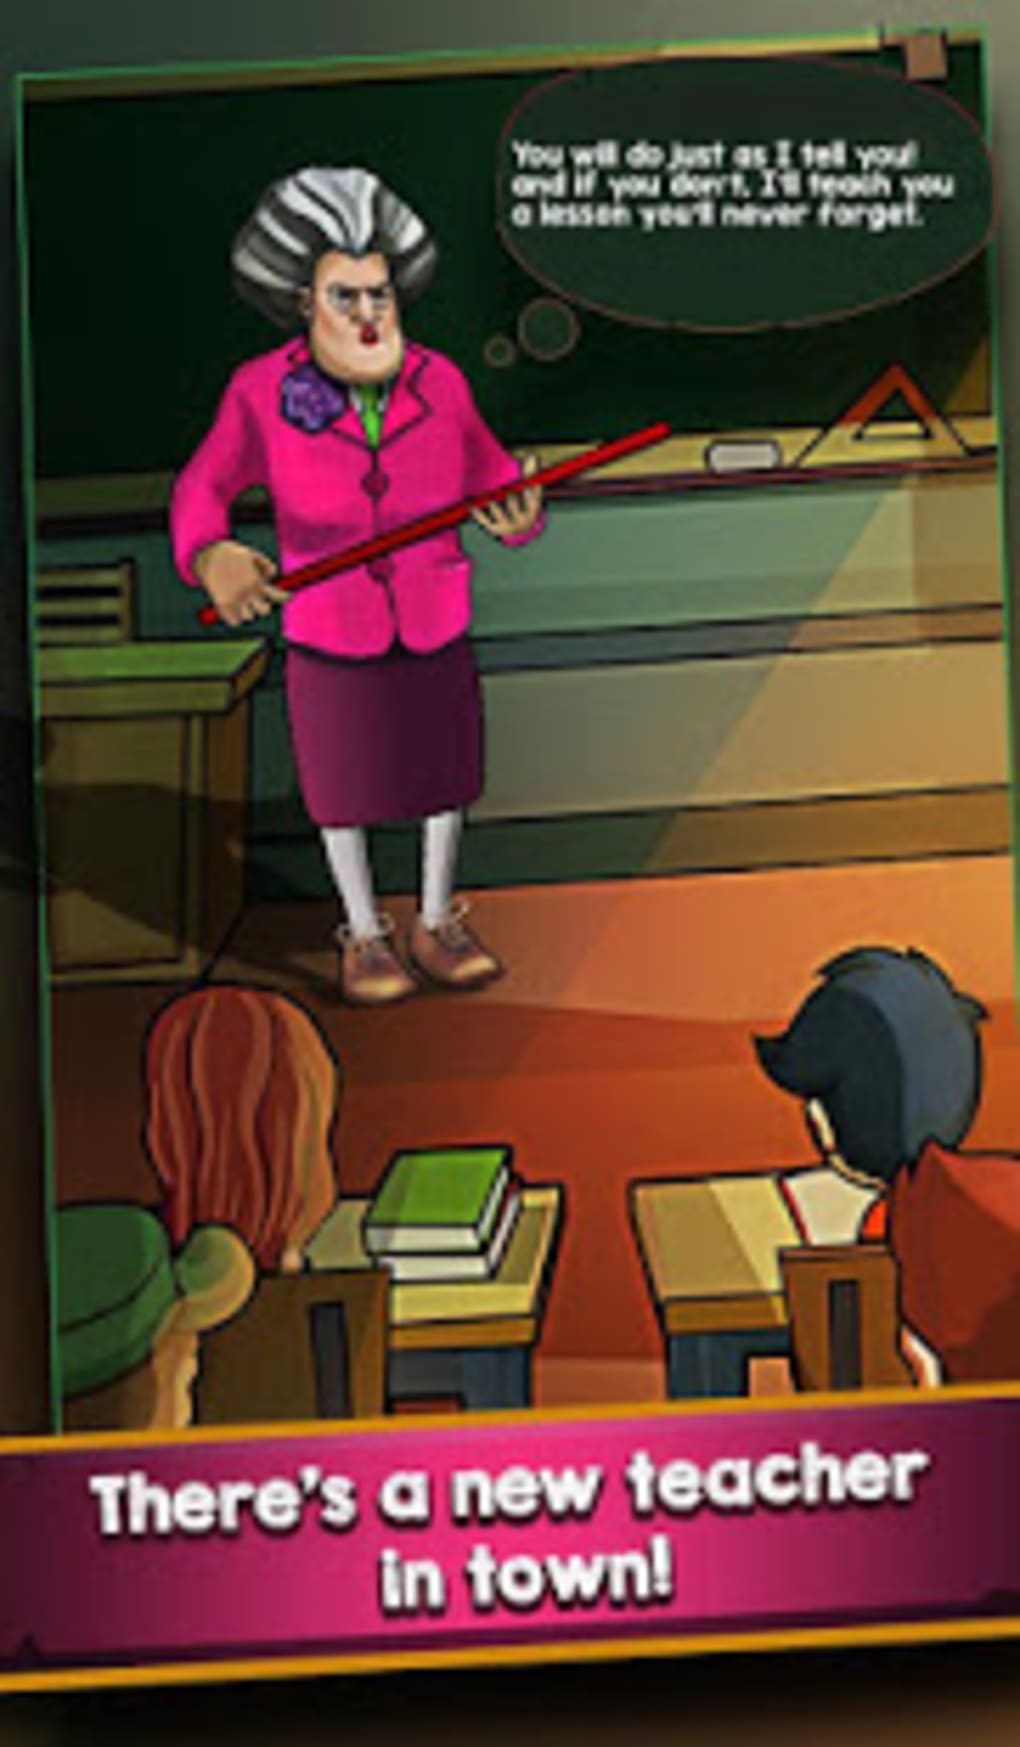 Download Scary Teacher 3D on Android, APK free latest version